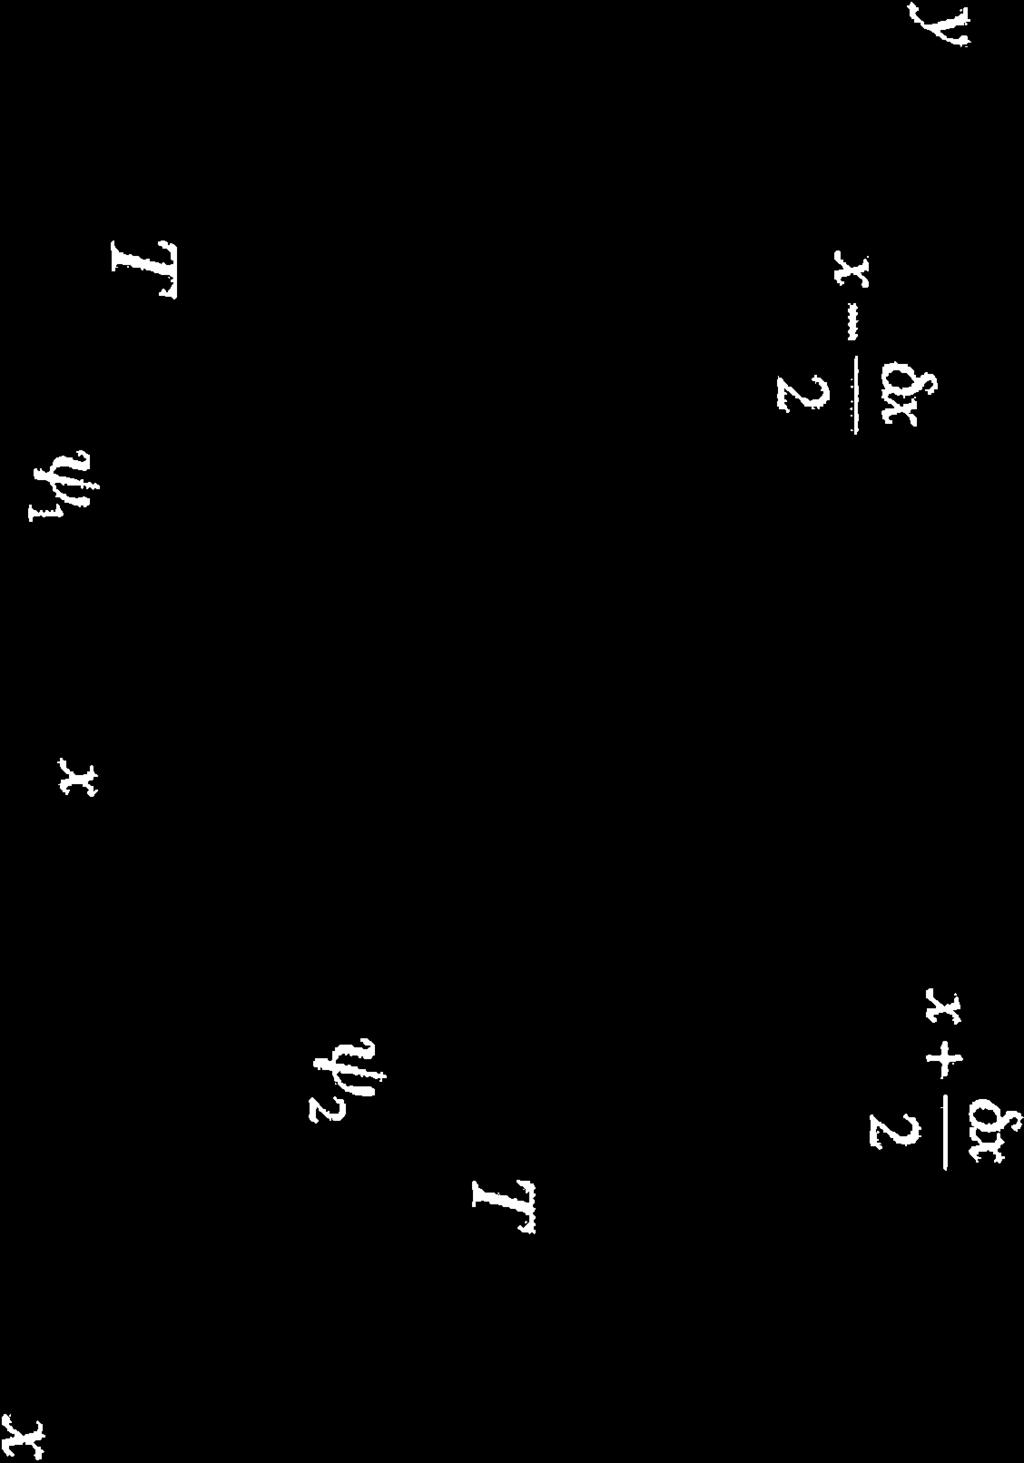 The mass of this segment of string is ρδx. Consider now the forces acting on this segment of string.